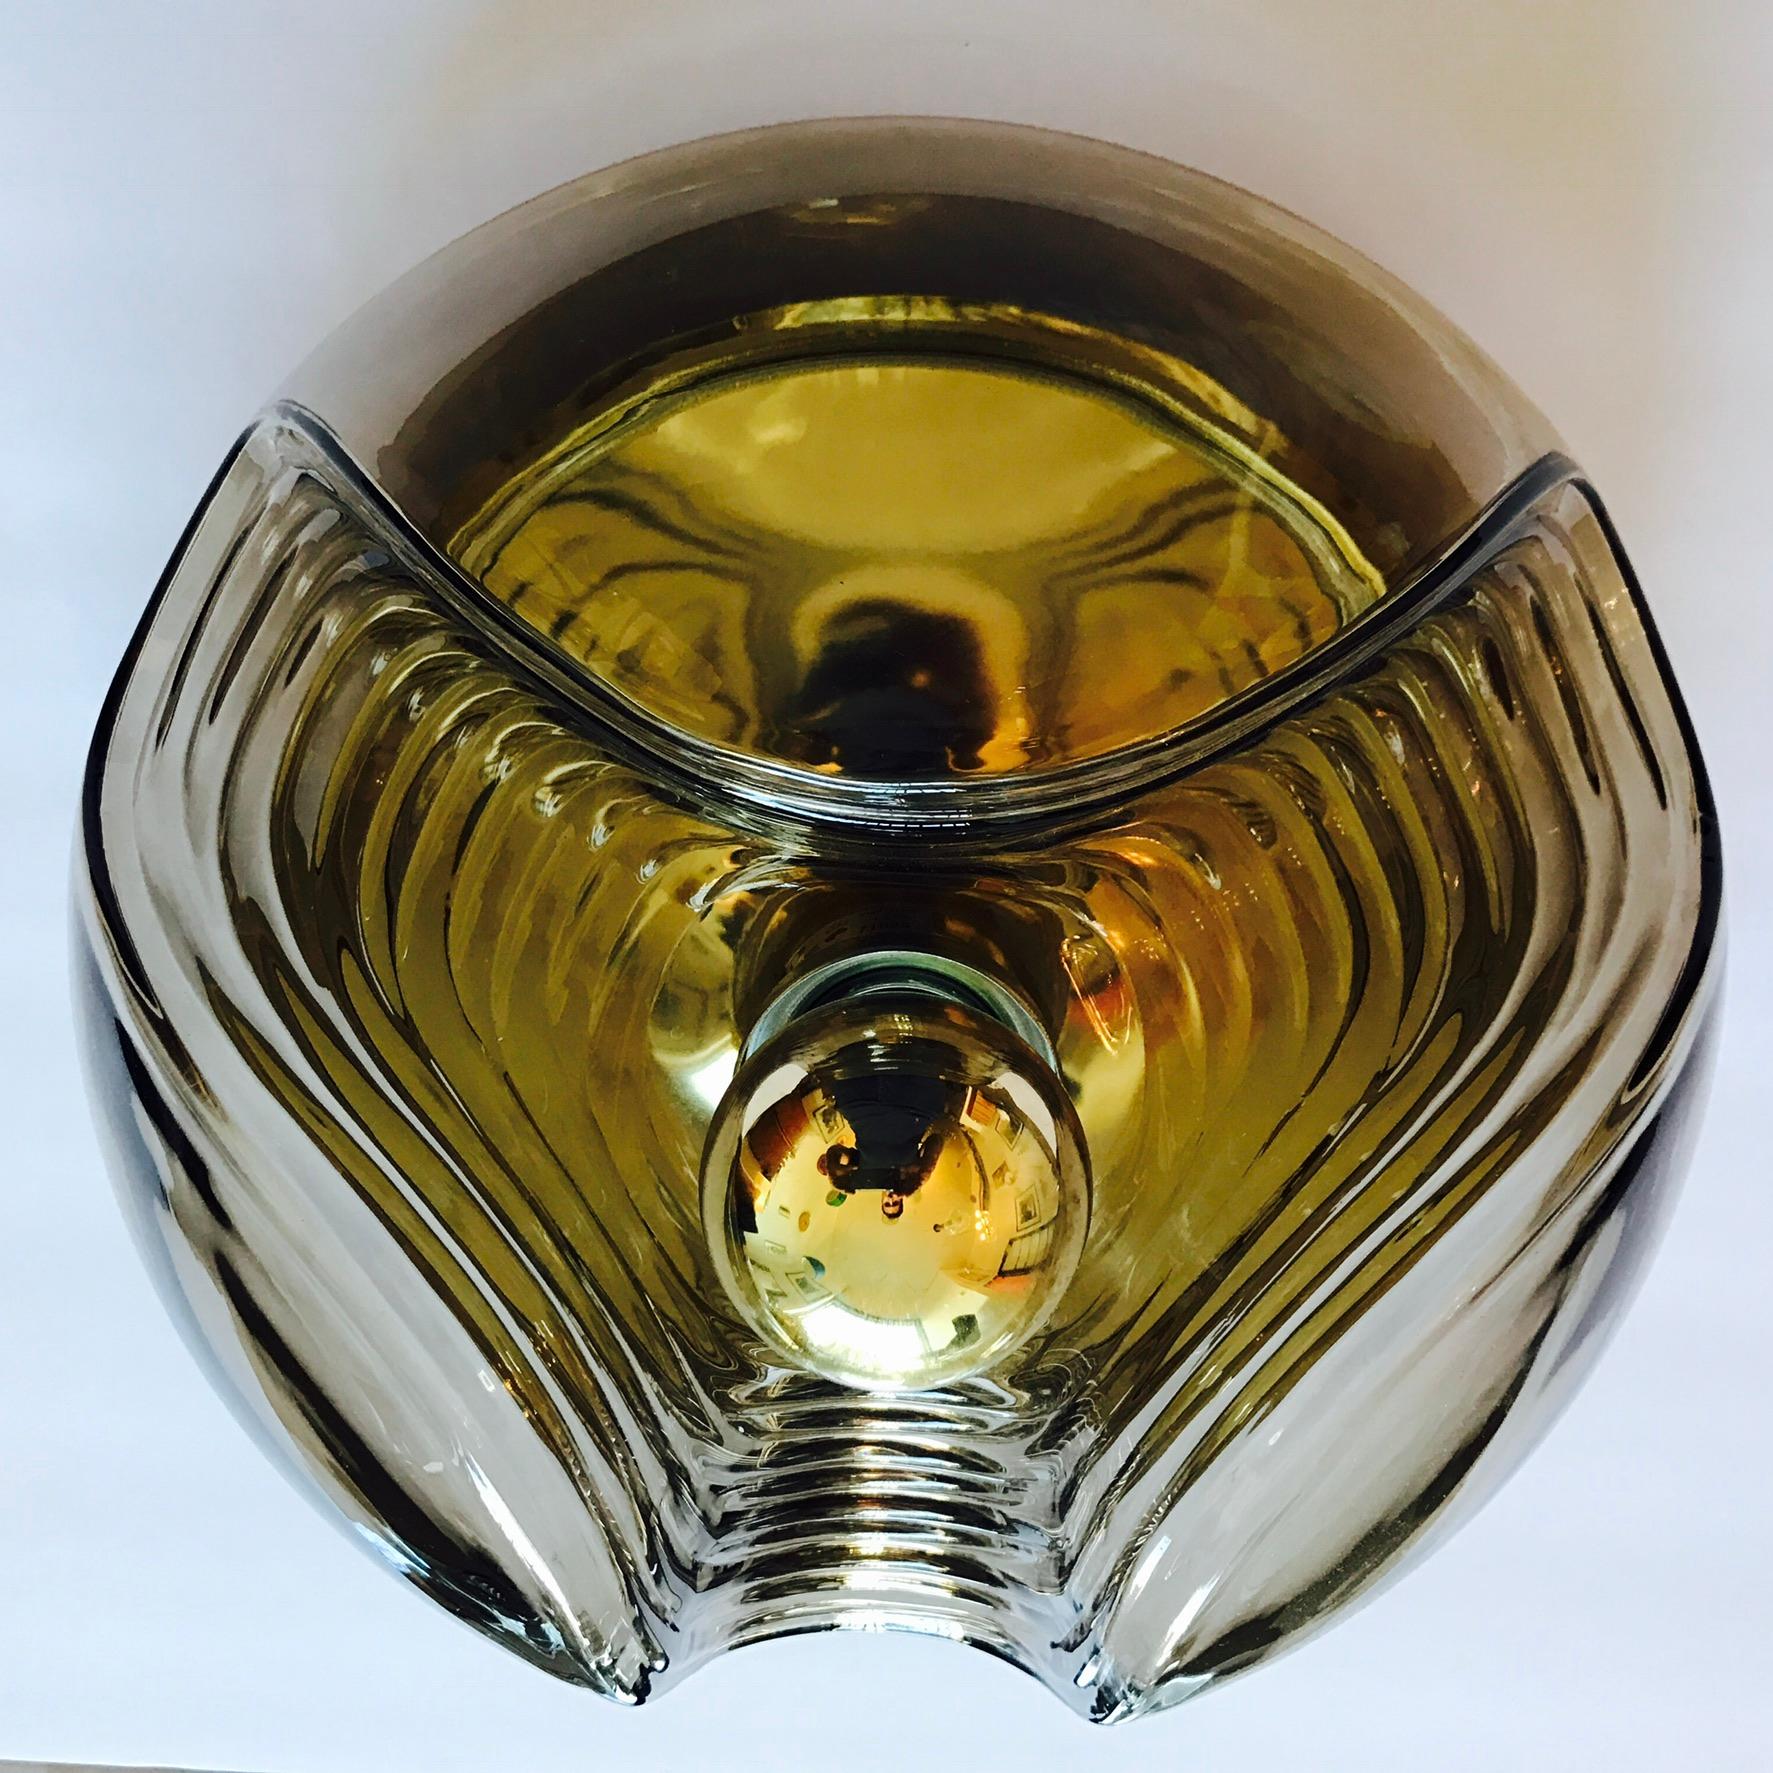 A great 1960s light smoked Space Age Flush lamp with a decorative ribbed glass shade on a reflective gold body. Made by Peill and a putzler. Newly rewired.